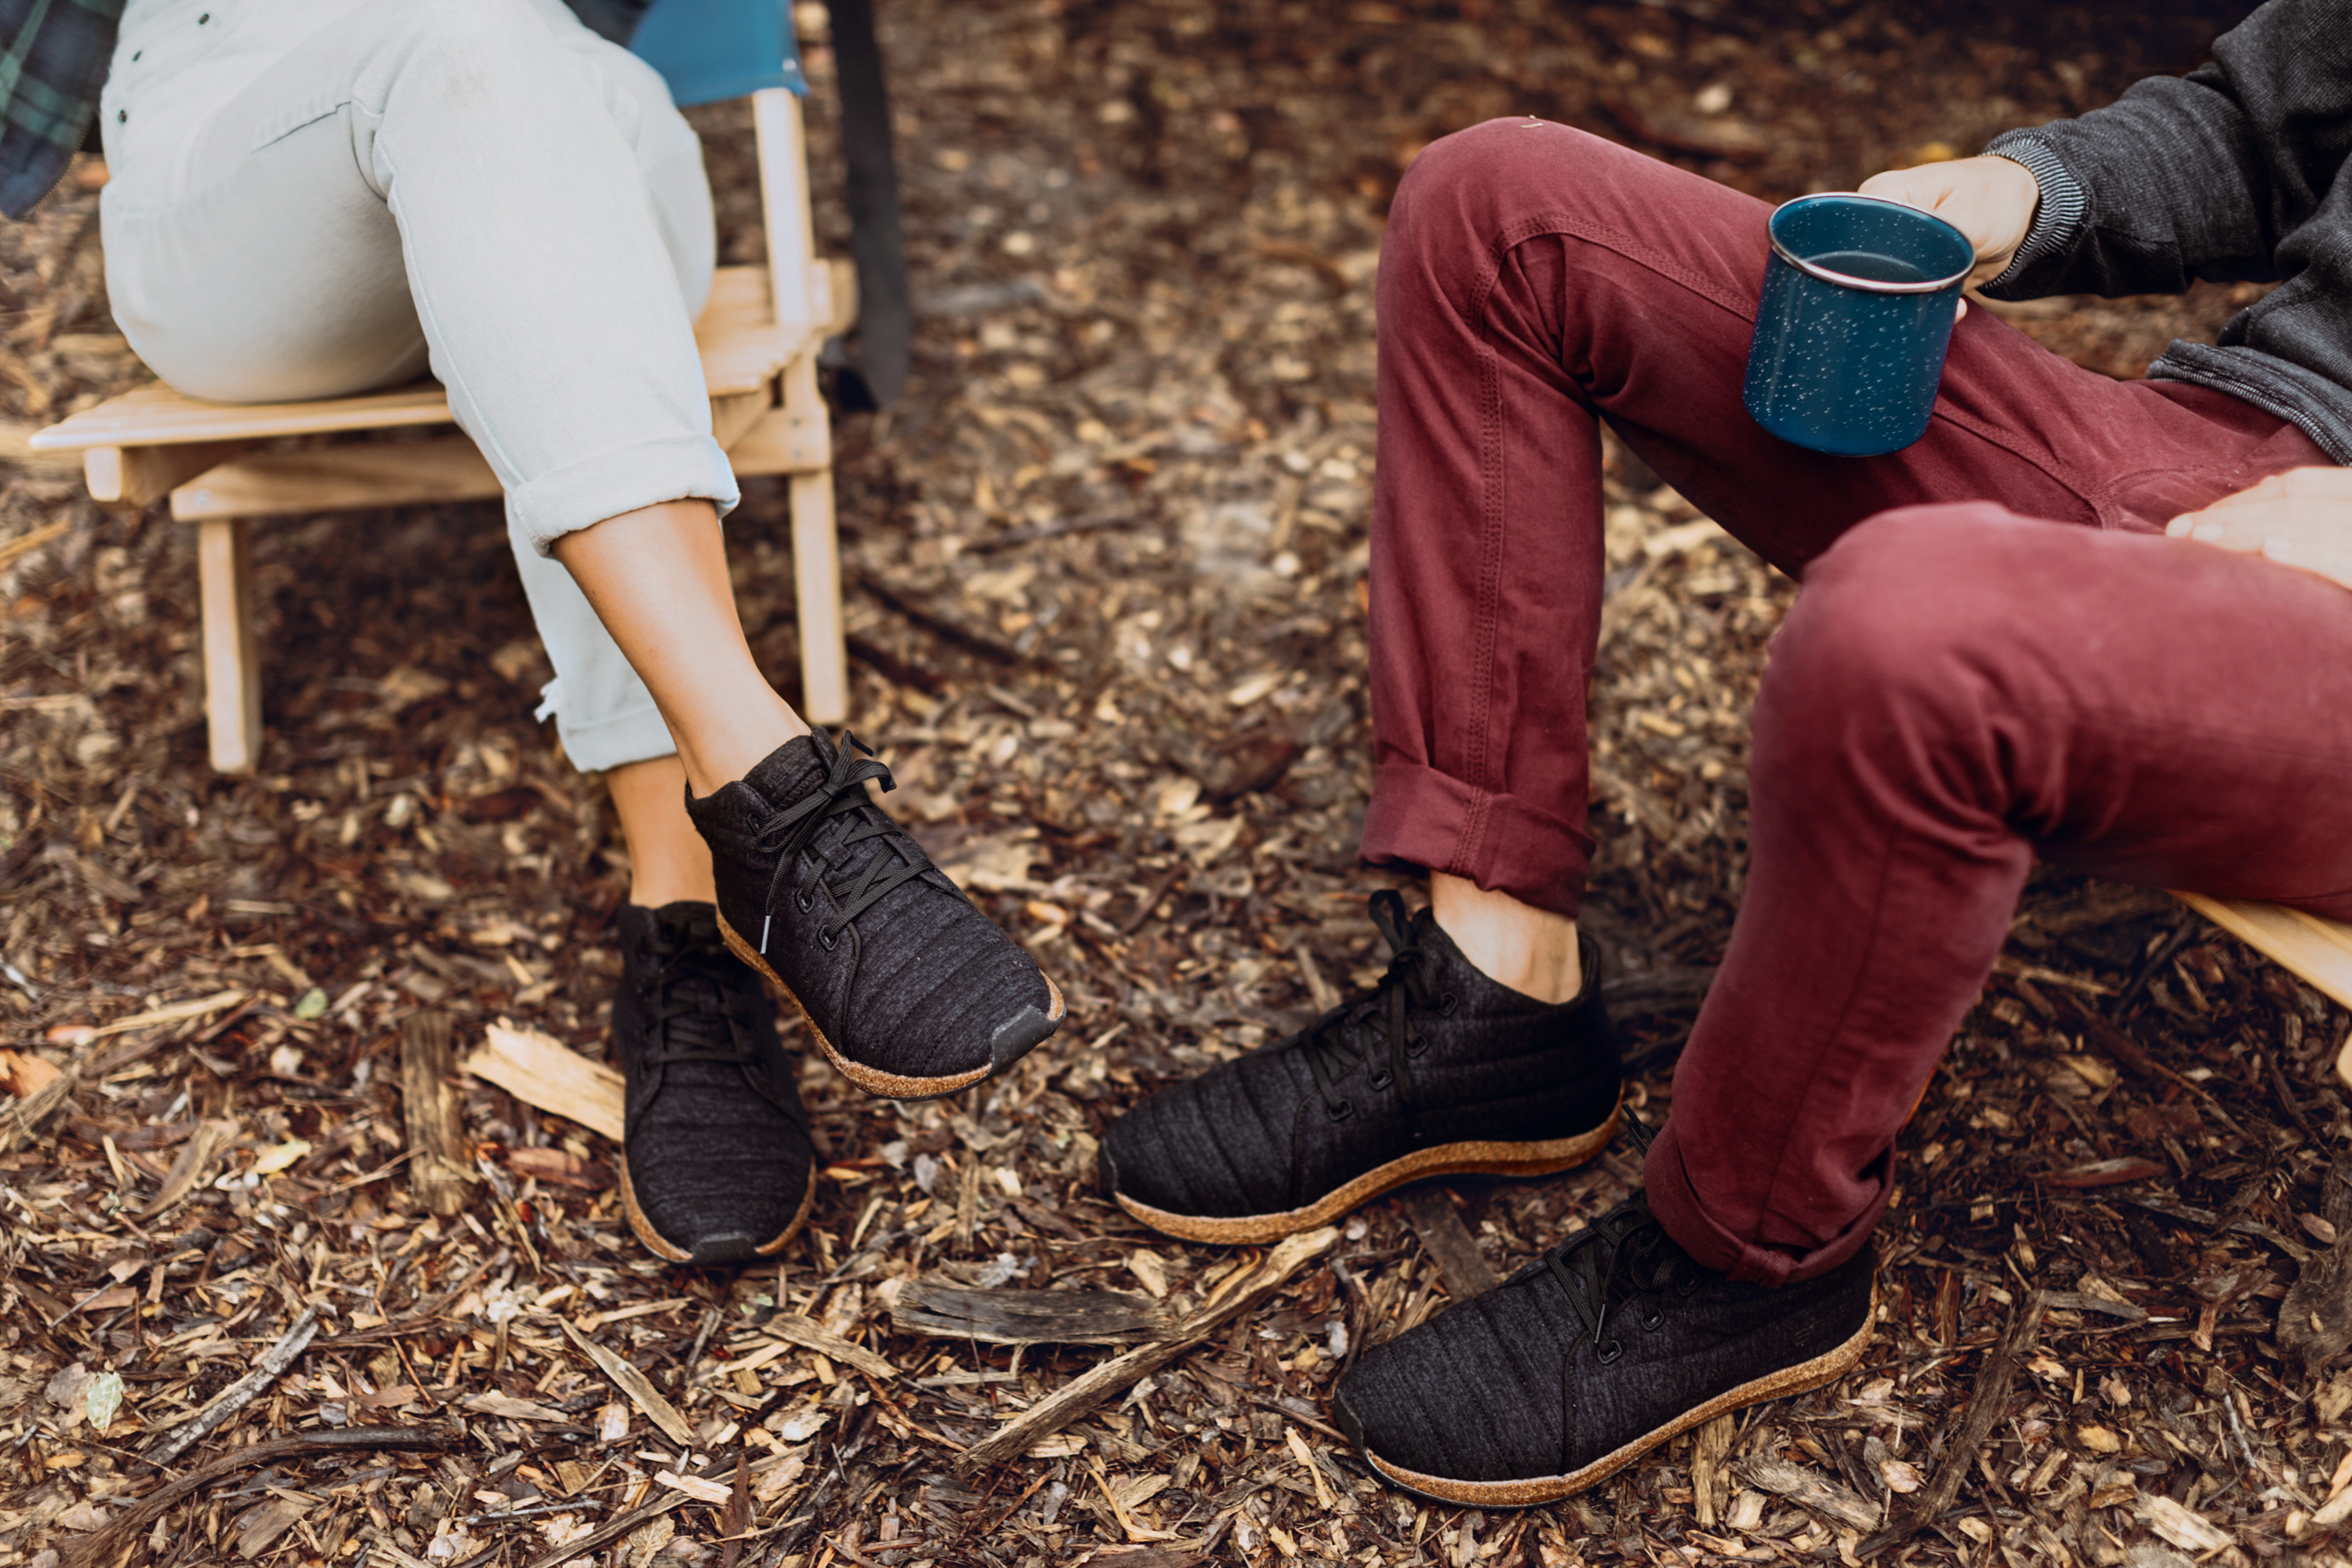 Meet the world's most eco-friendly shoes